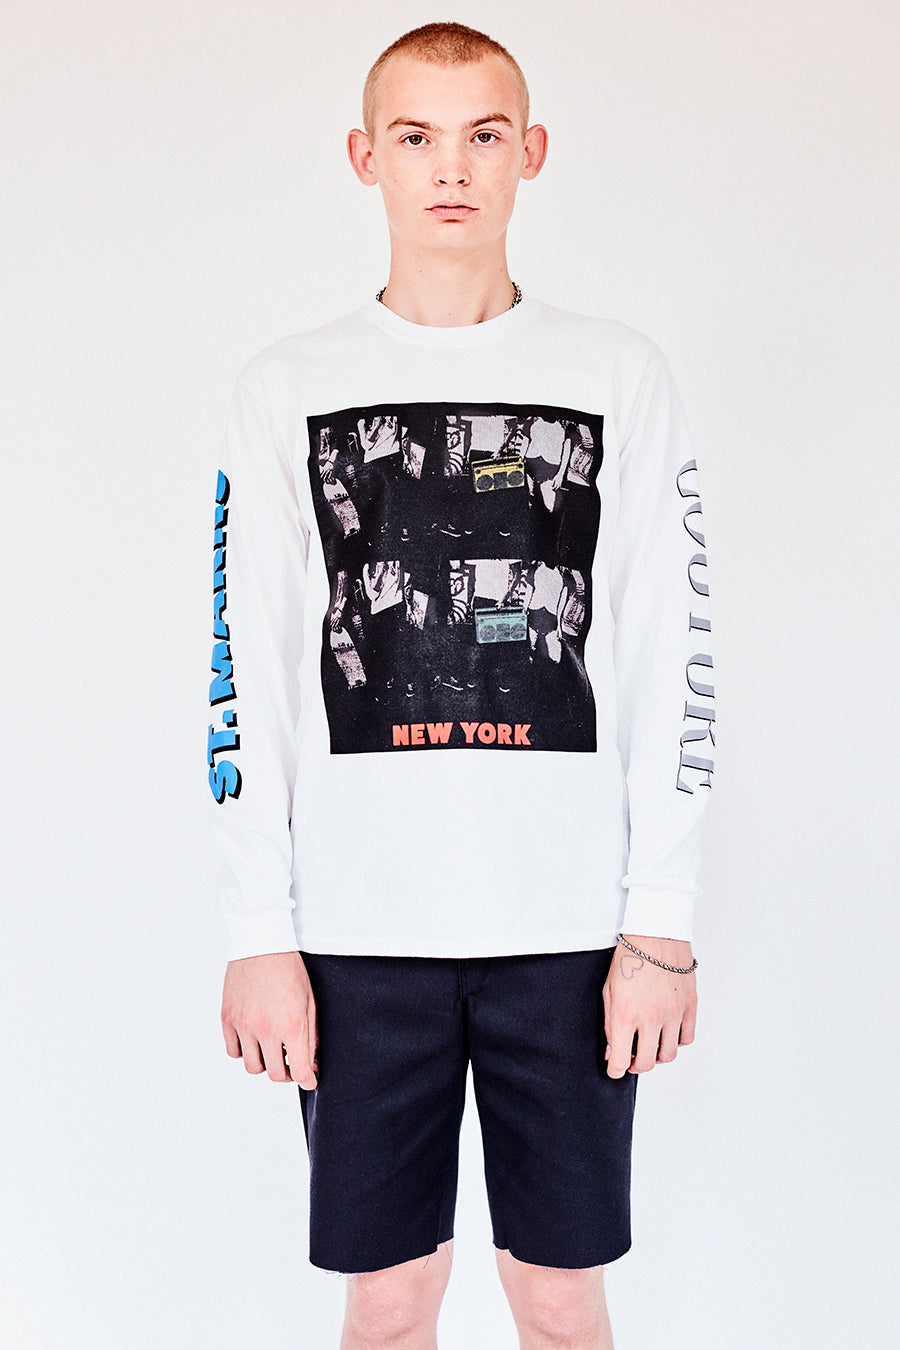 Brand New from New York City: Stmarksnewyork.com. Shop The St. Marks boombox white long sleeve T-shirt: featuring our image from St Marks Place, and the St. Marks Couture New York logo on the back.  Hand silkscreen printed in New York with love.